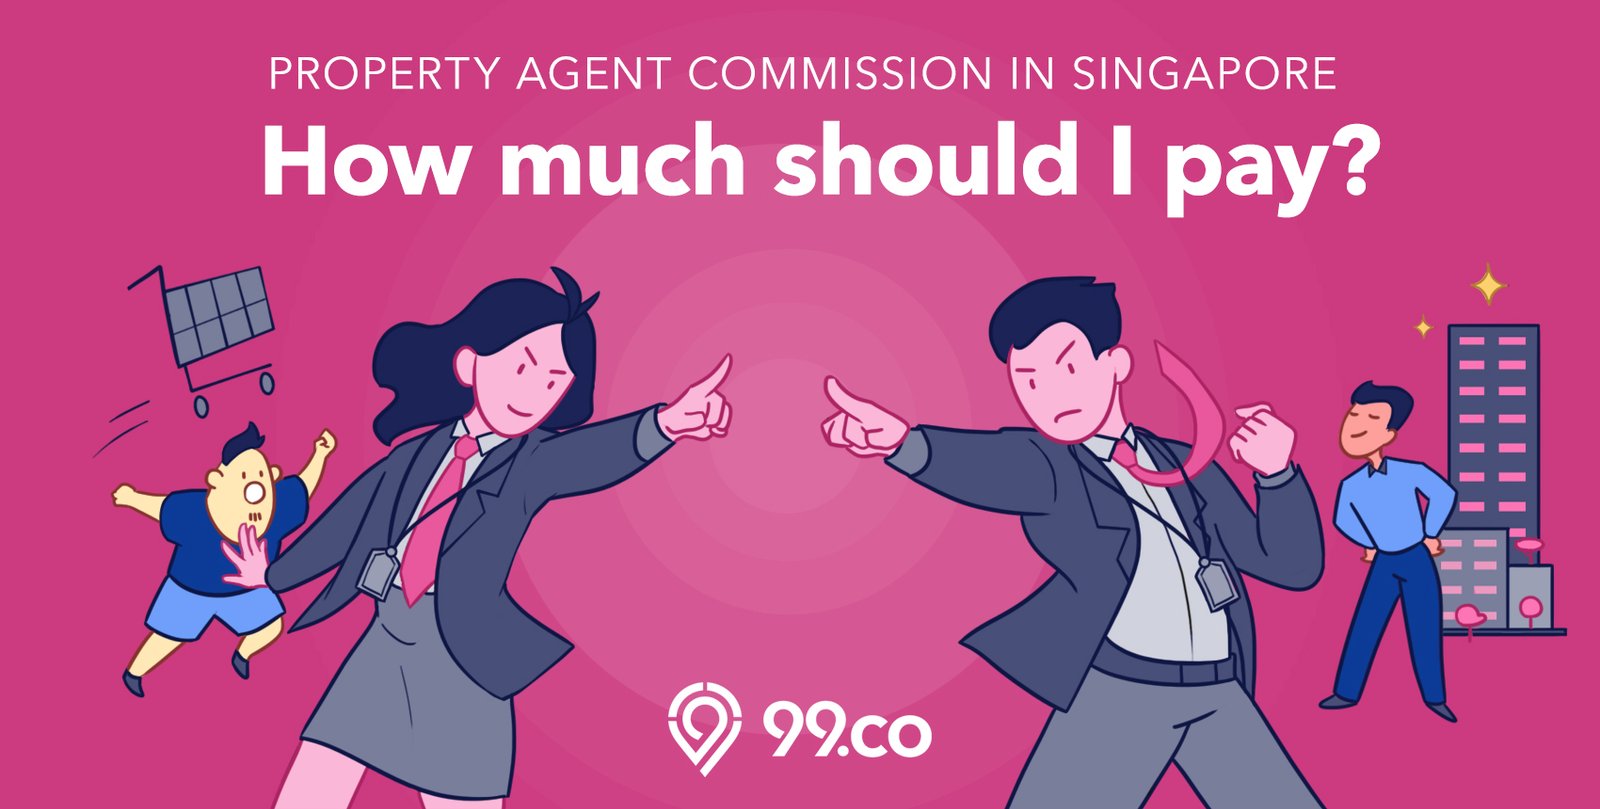 Property agent commission in Singapore: How much should I pay?